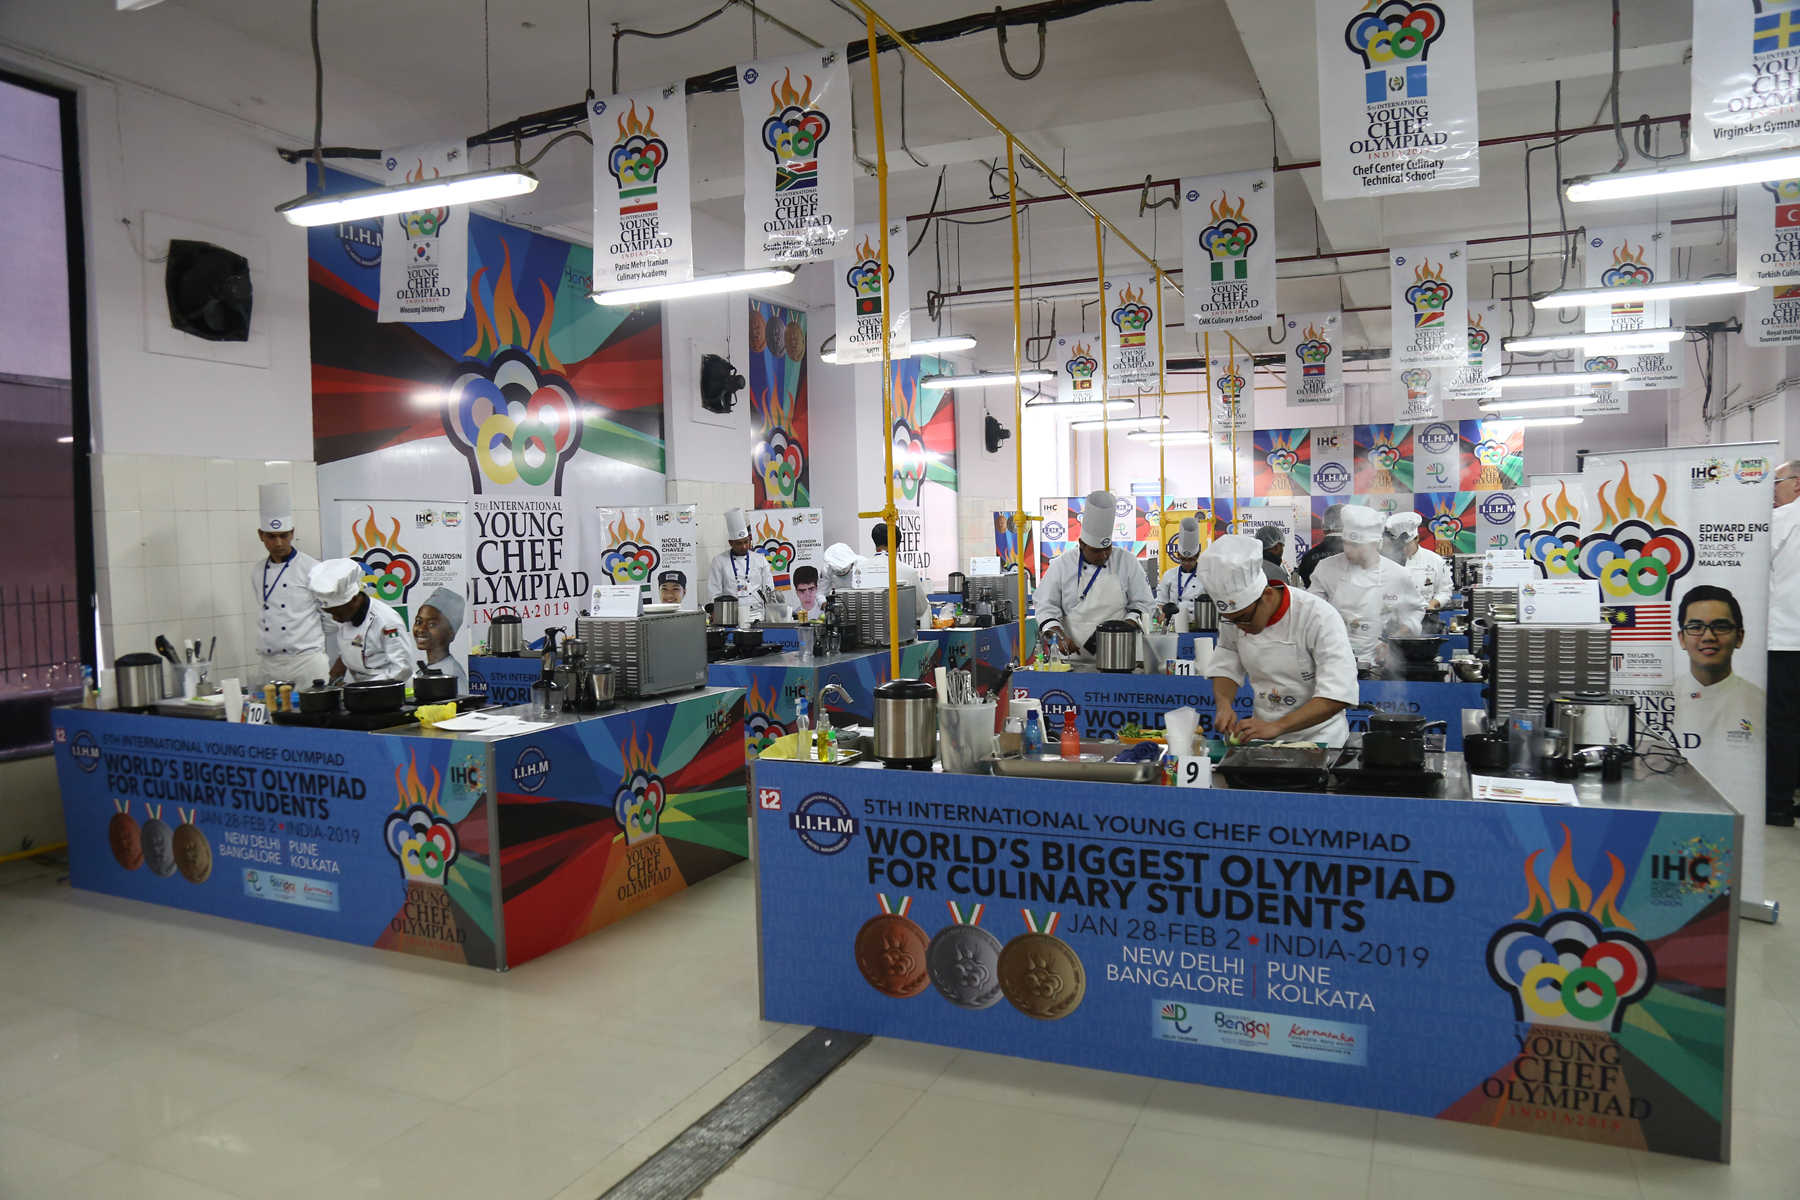 A glimpse of the International Young Chef Olympiad 2019